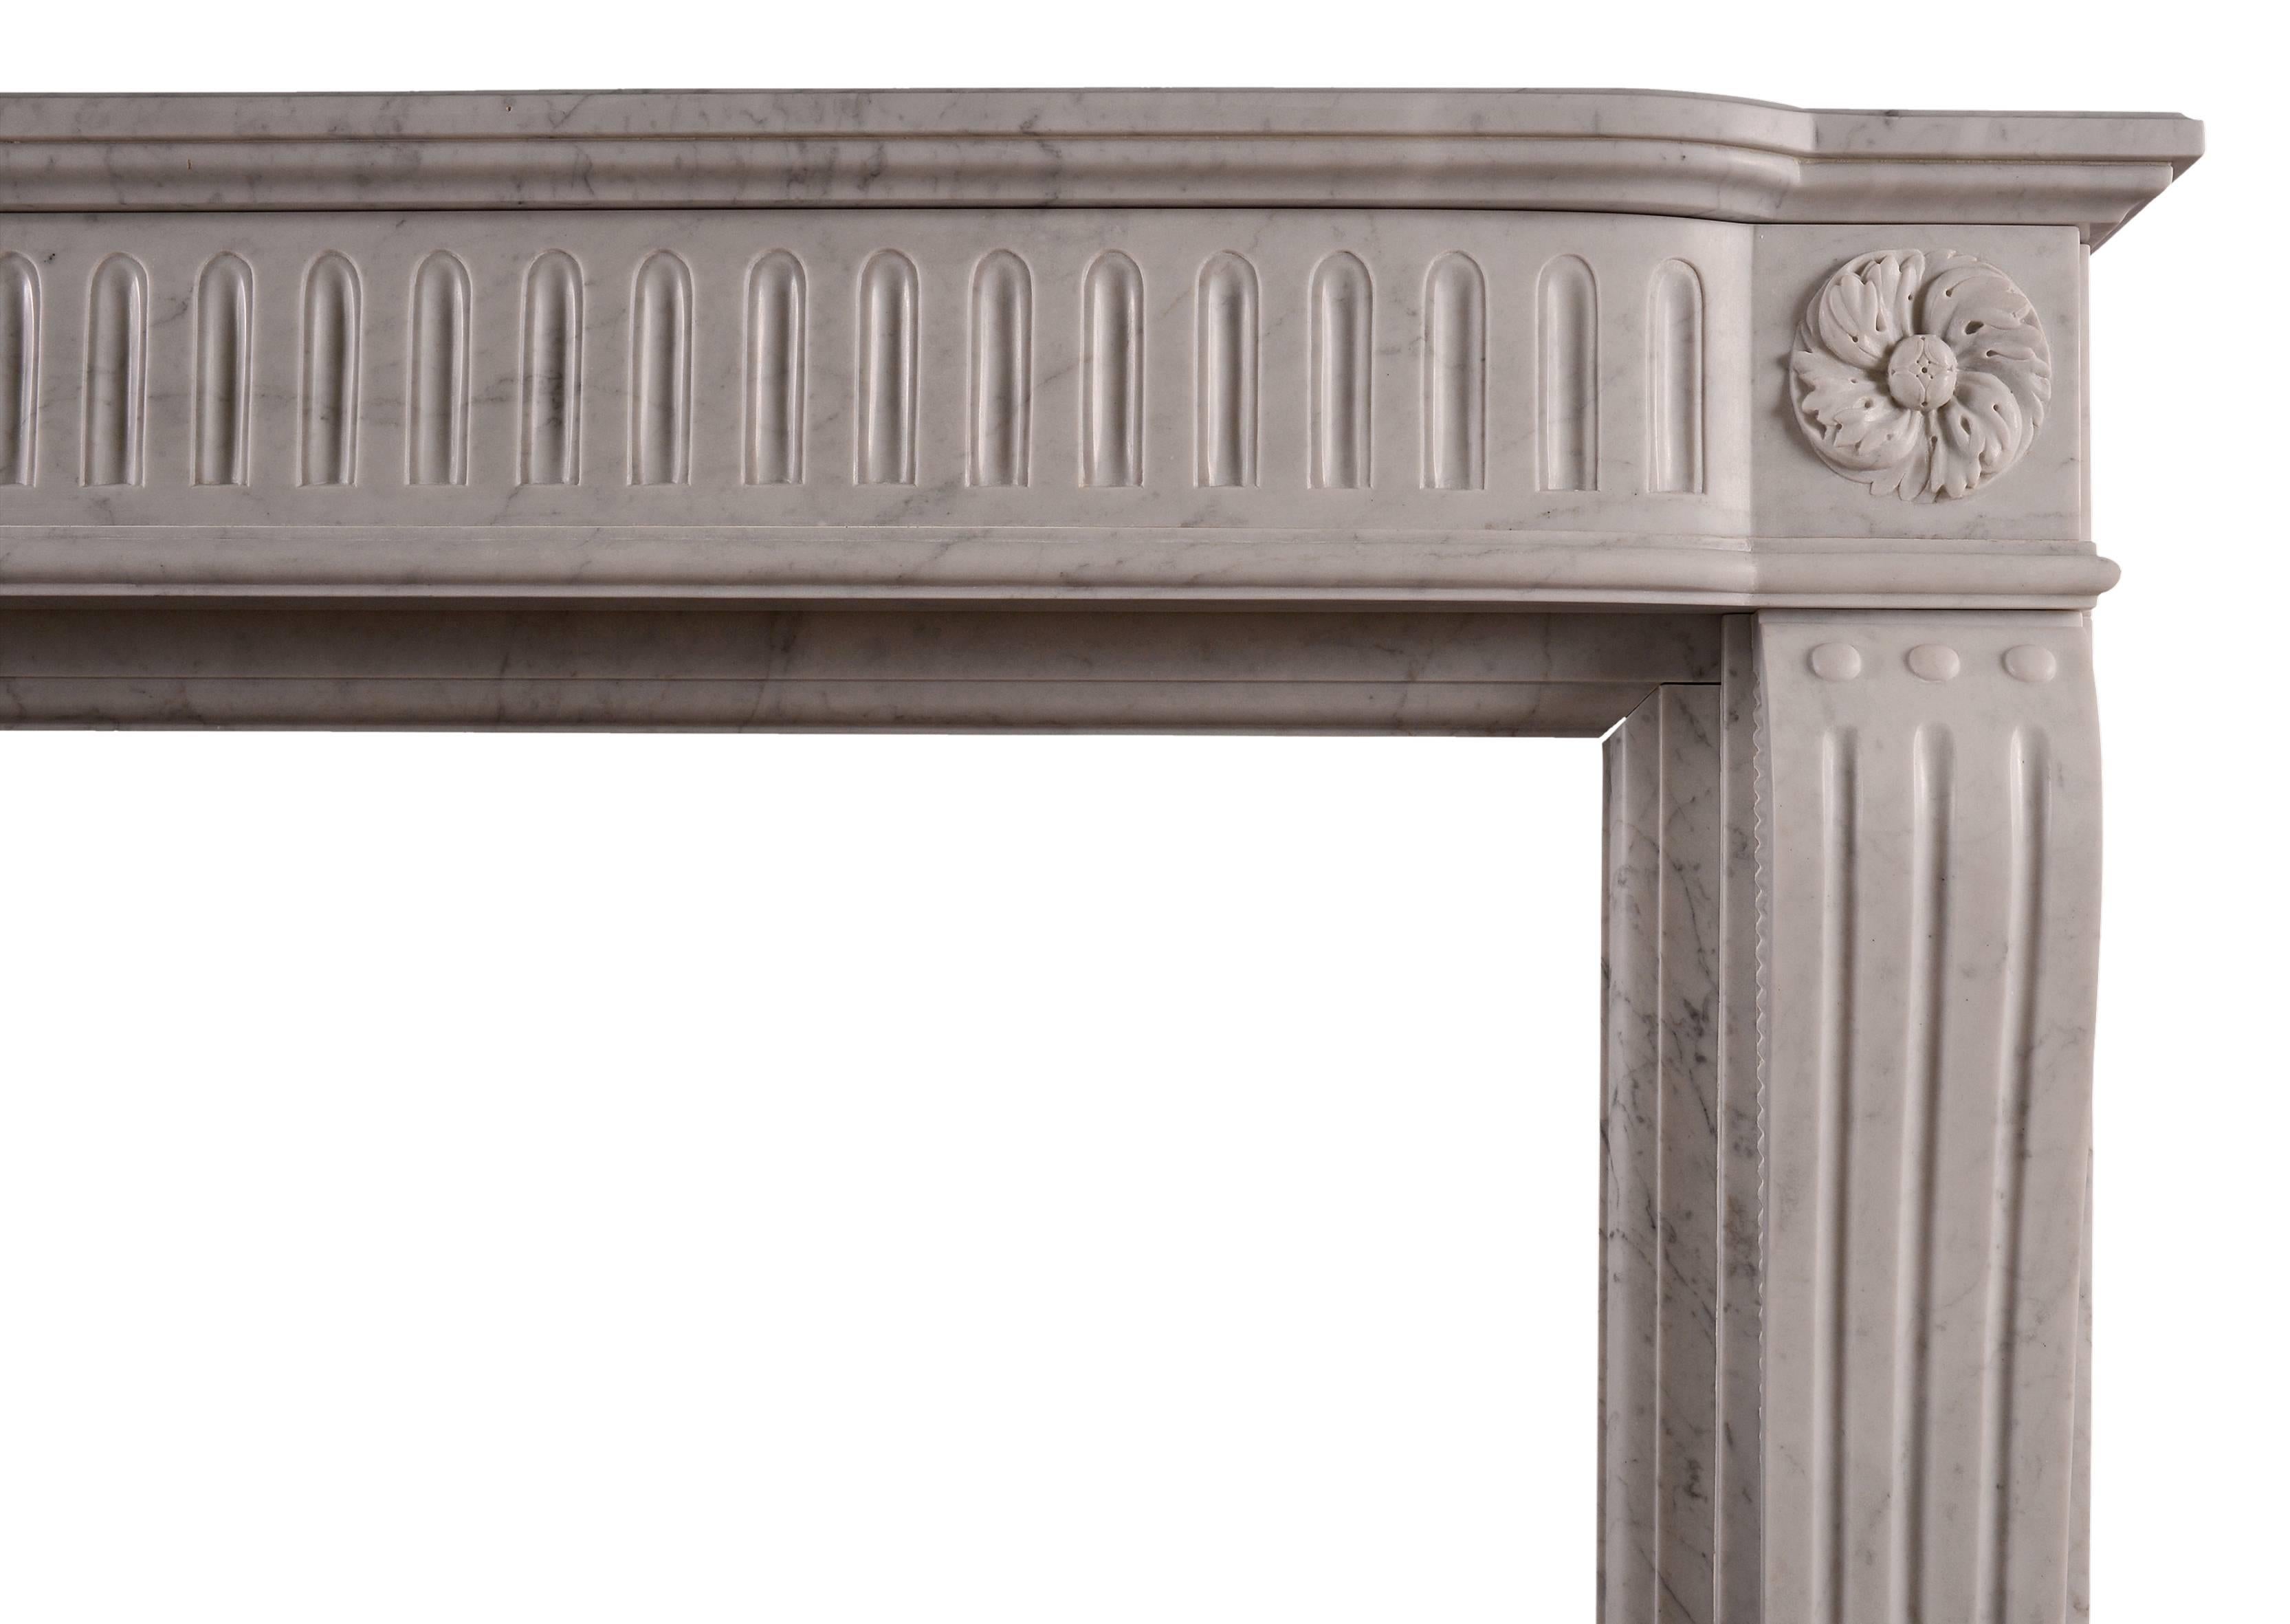 A Carrara marble fireplace in the Louis XVI manner. The shaped, stop fluted jambs surmounted by swirling carved paterae. The bowed frieze with matching flutes and moulded shelf above, French, 19th century.

Measurements:
Shelf width: 1535 mm / 60